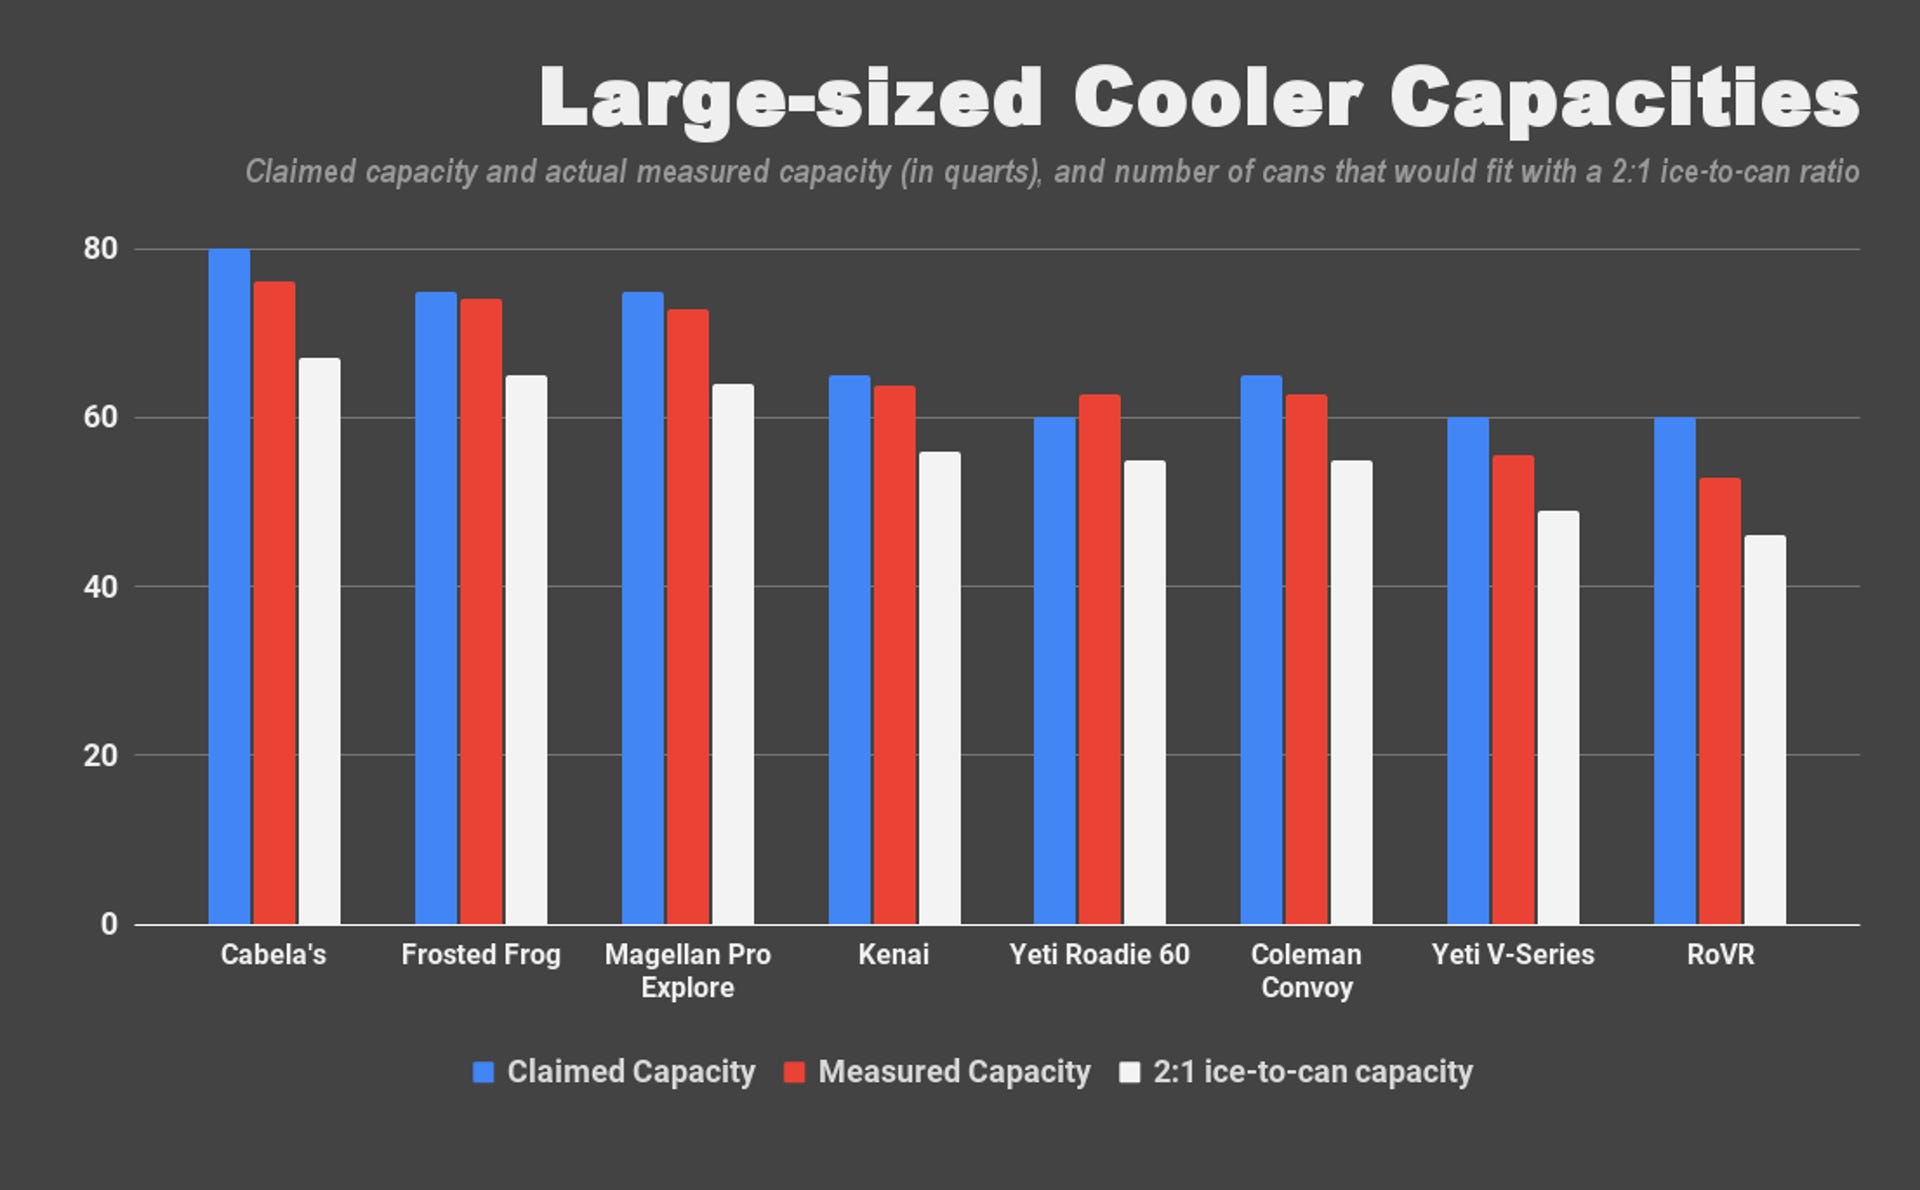 A bar graph shows the measured capacities of eight large-sized coolers. The 80-quart Cabela's Polar Cap Equalizer cooler offers the most space, with a measured volume of 76.2 quarts, enough to pack in 67 cans with a 2:1 ice-to-can ratio. 